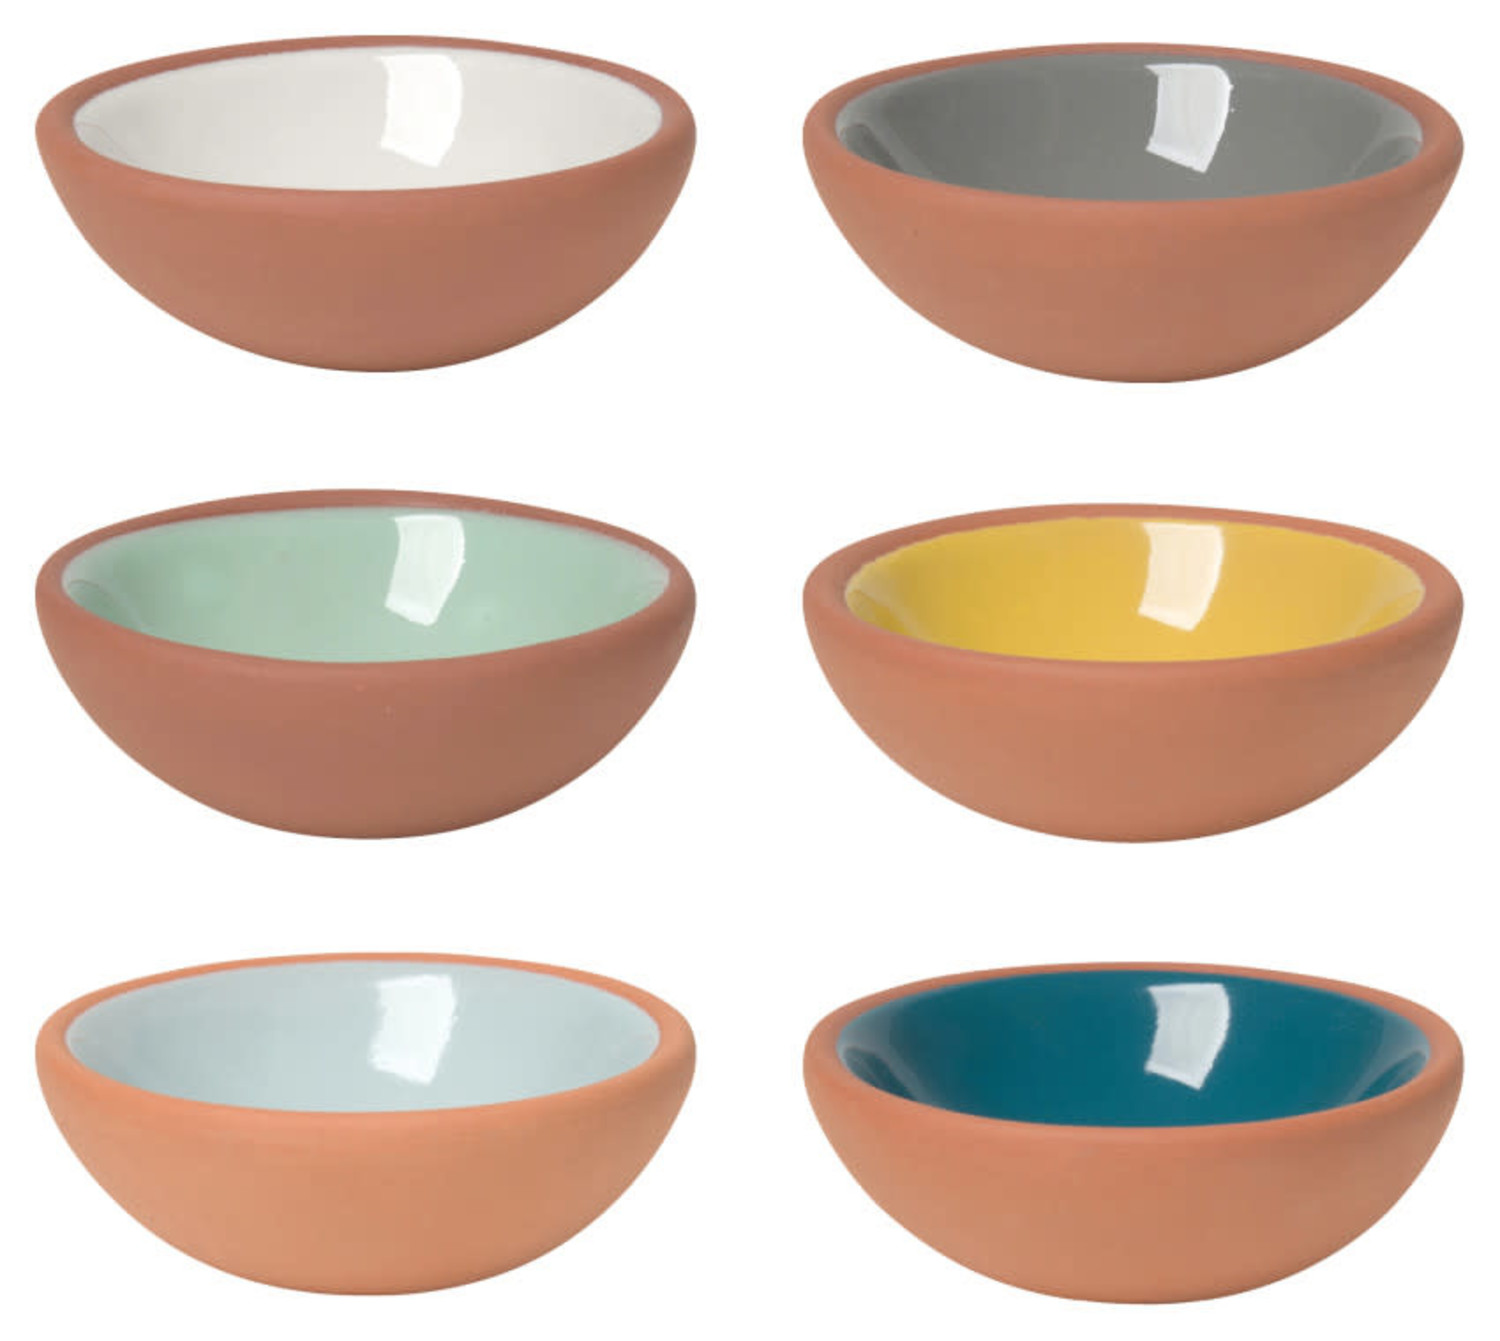 Terracotta Pinch Bowls, set of 6 - Whisk